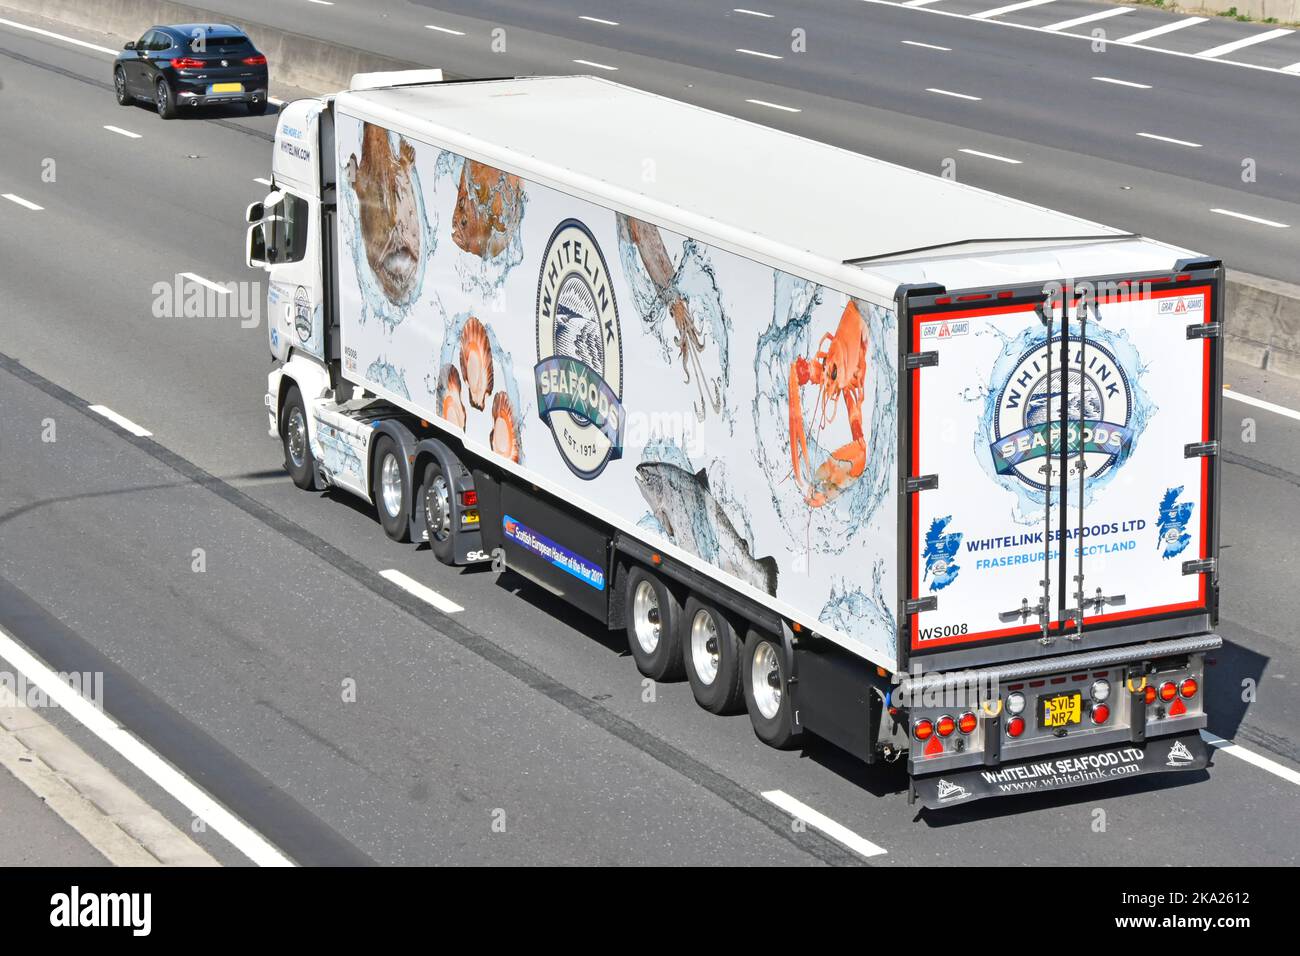 White Scania hgv lorry truck trailer operated by Whitelink Sea Foods Ltd a Fish & Seafood family business in Fraserburgh Scotland driving UK motorway Stock Photo